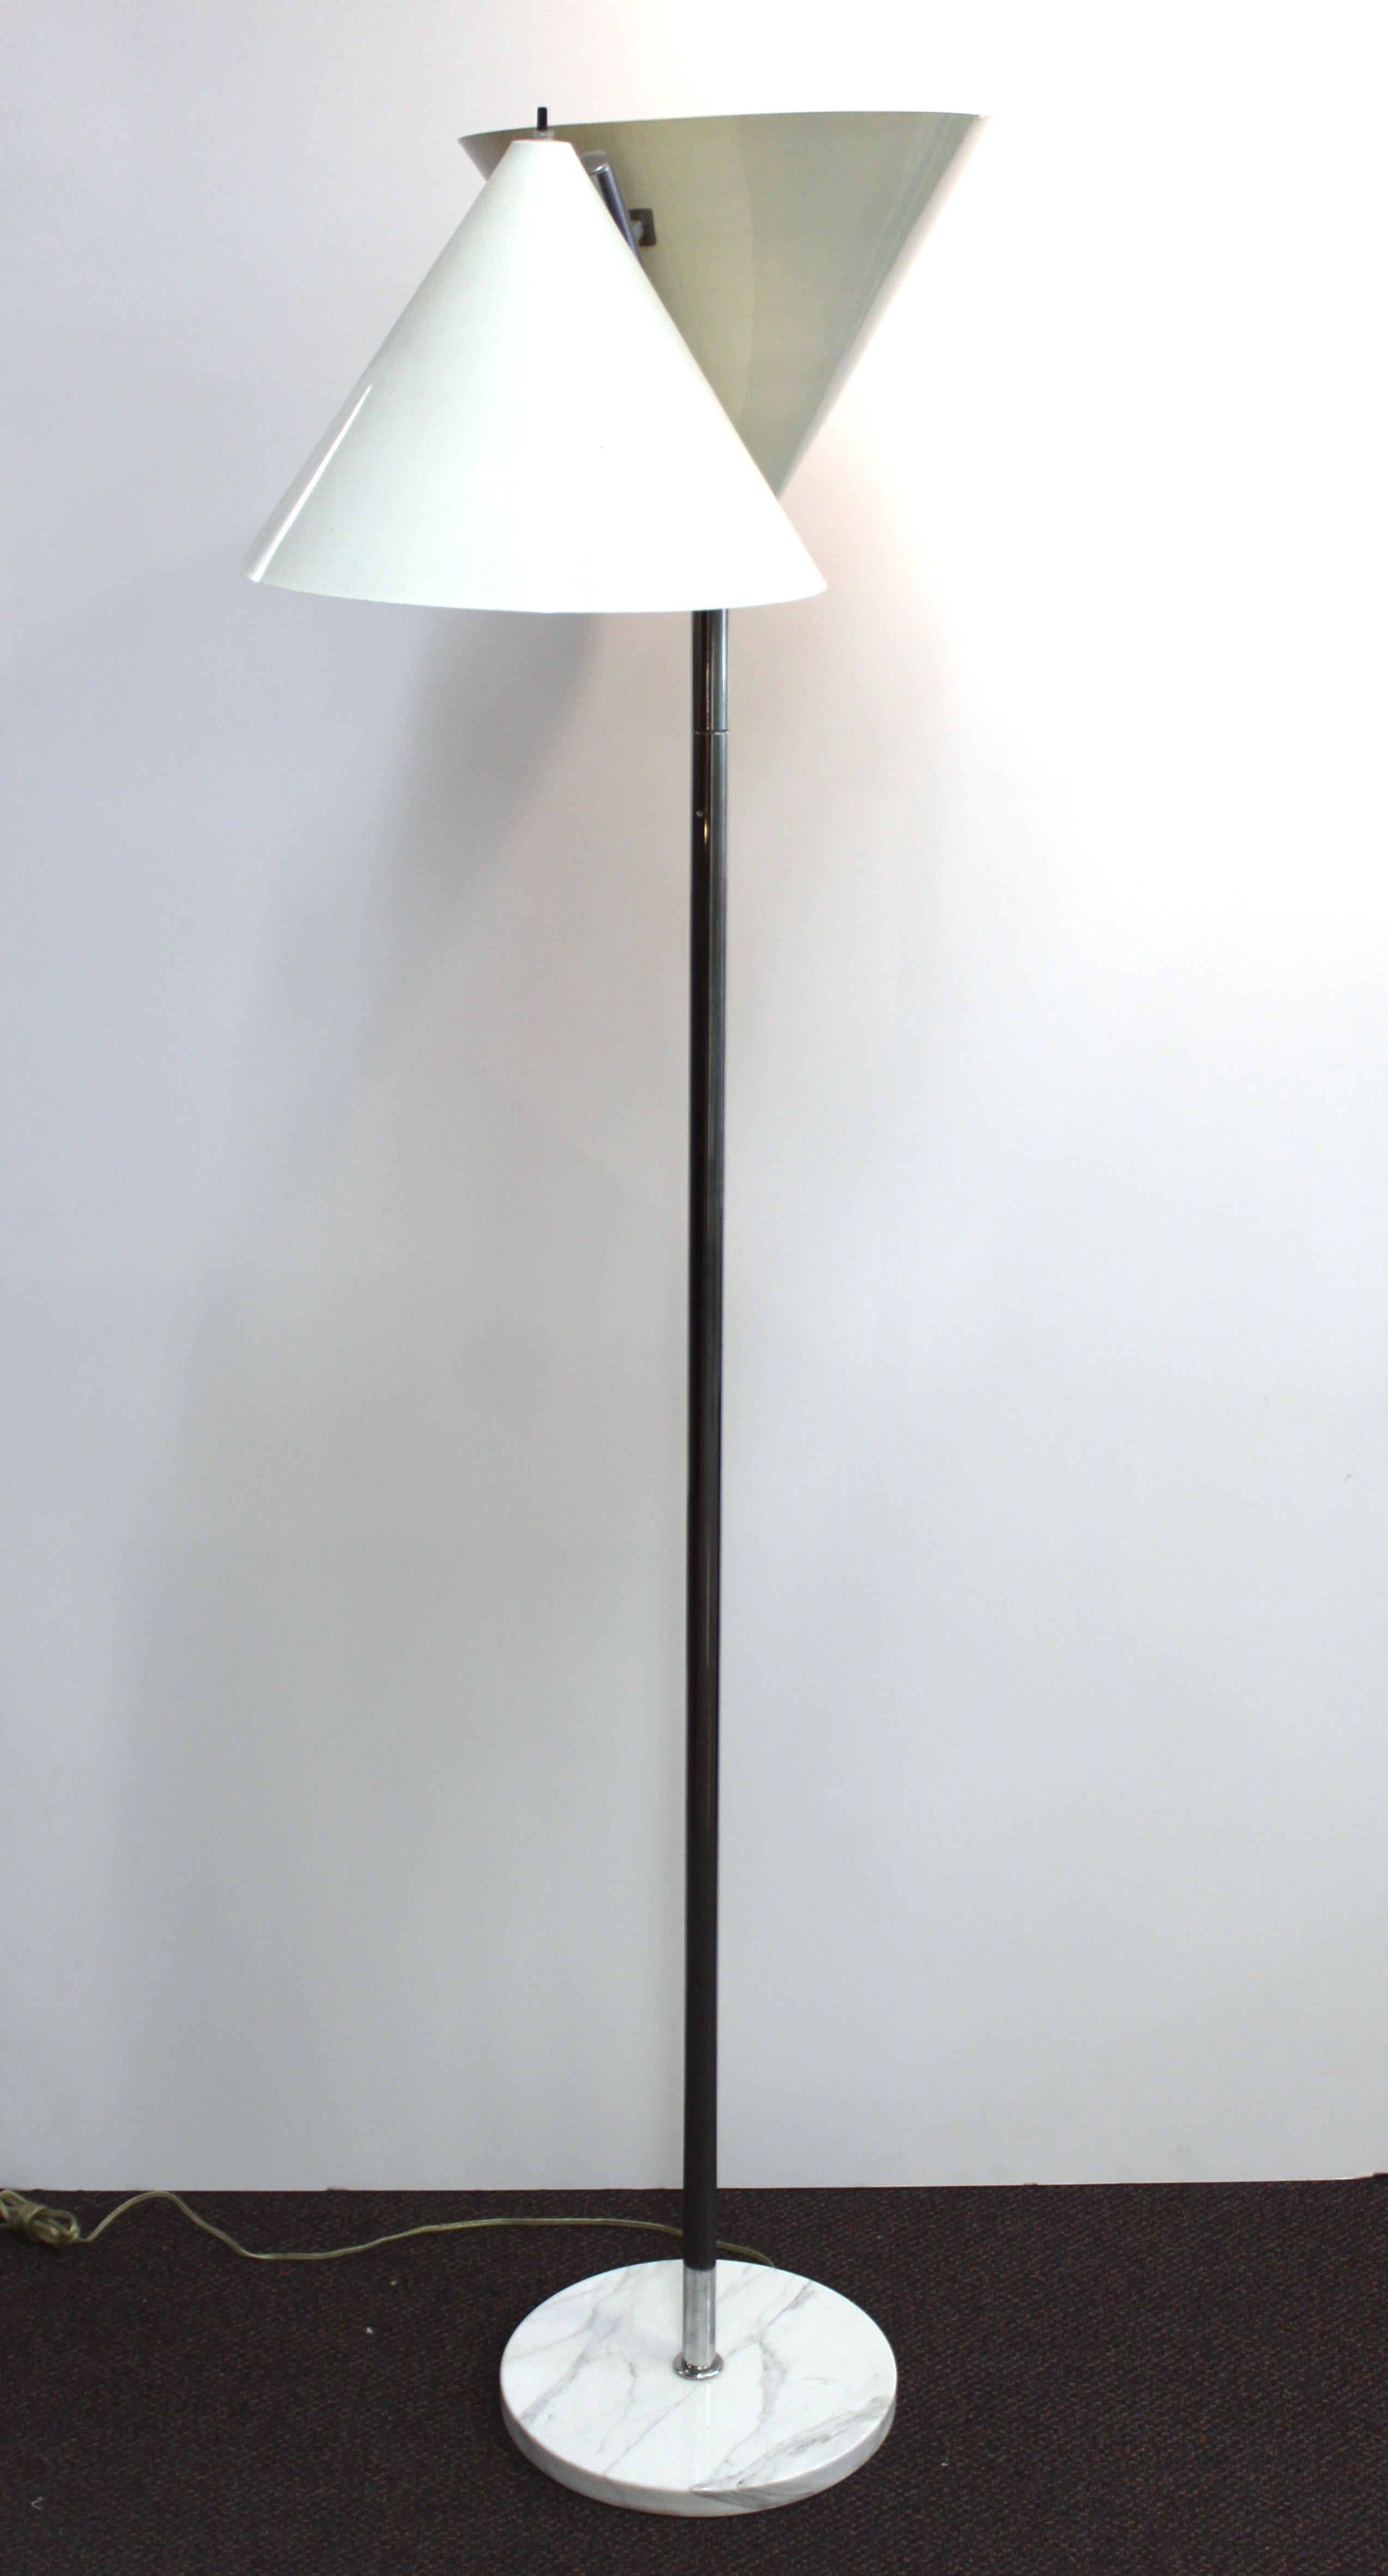 Italian modern floor lamp designed in the style of Arteluce, with two metal cone shades and a white veined circular marble base. The bottom is marked 'Made in Italy'. In great vintage condition with age-appropriate wear.